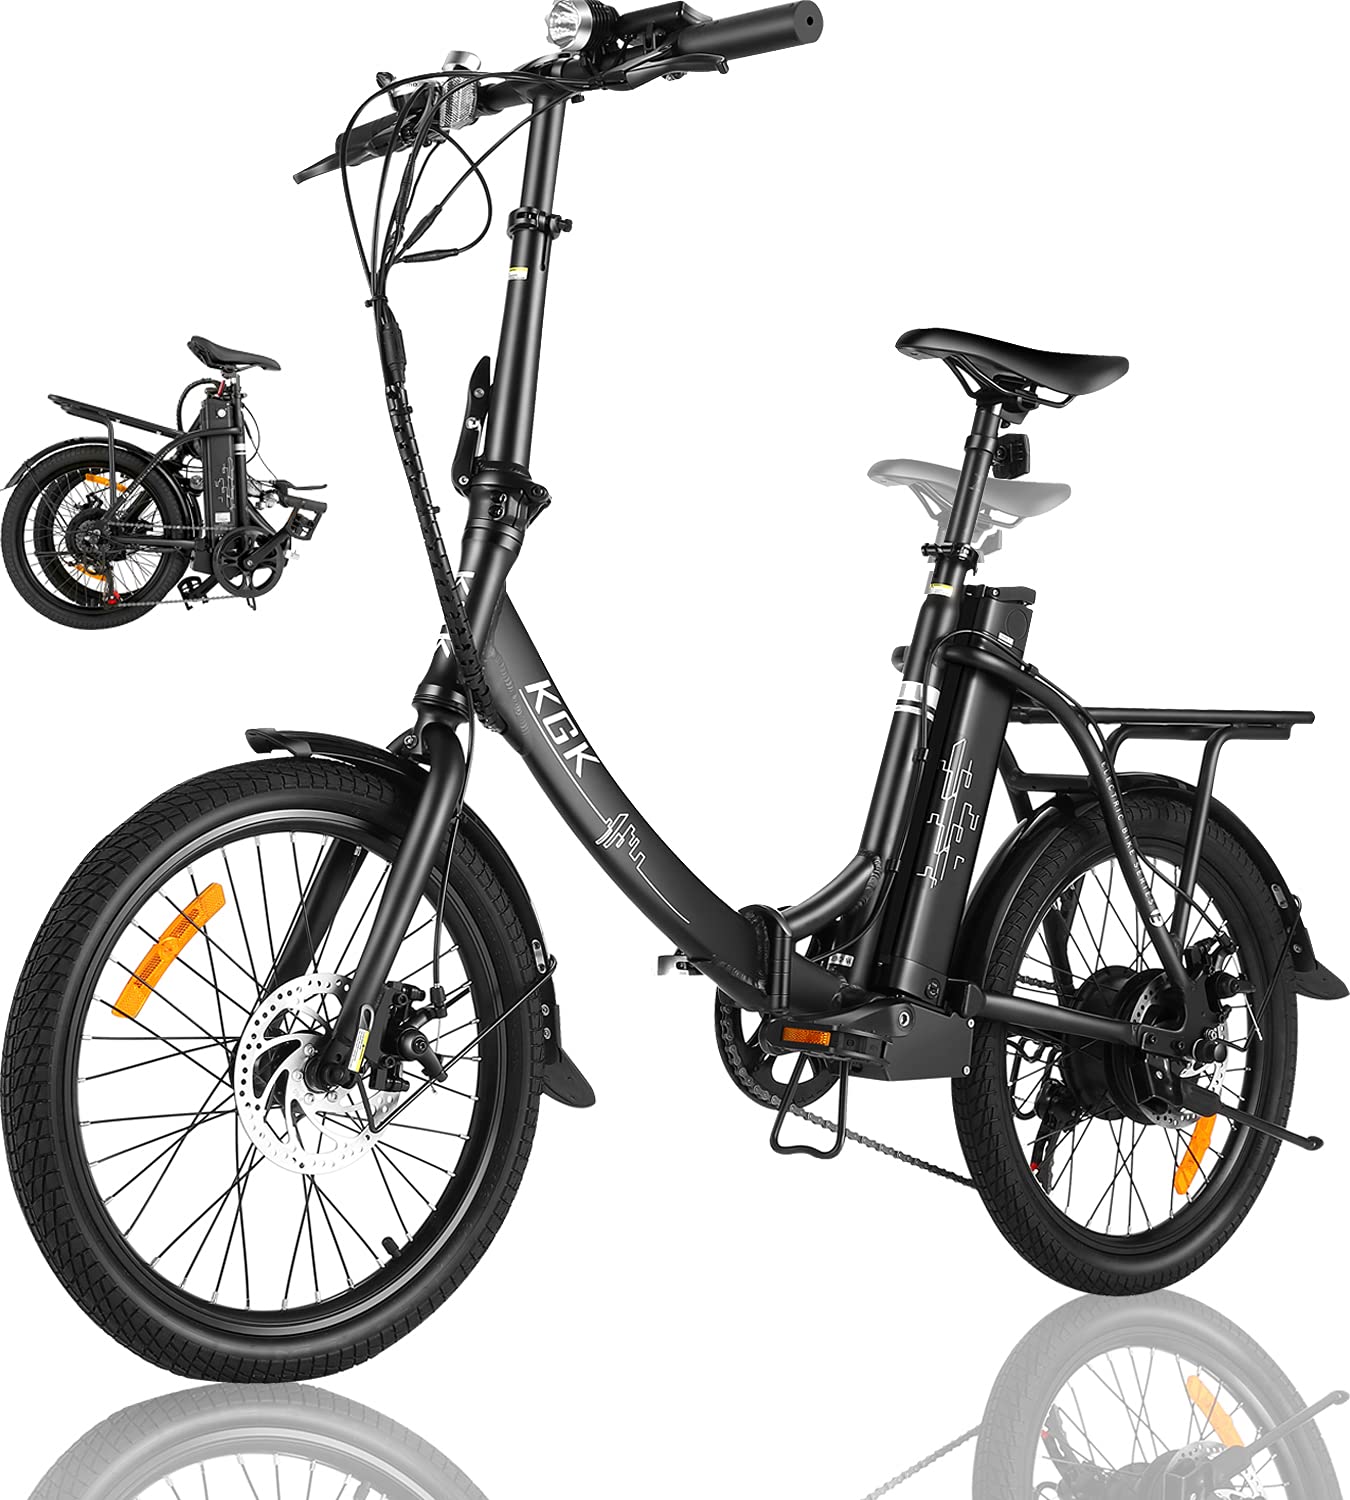 Nakto 250W Shimano 6-Speed Gear Electric Bicycle with 36V10Ah Lithium Battery | Decor Gifts and More